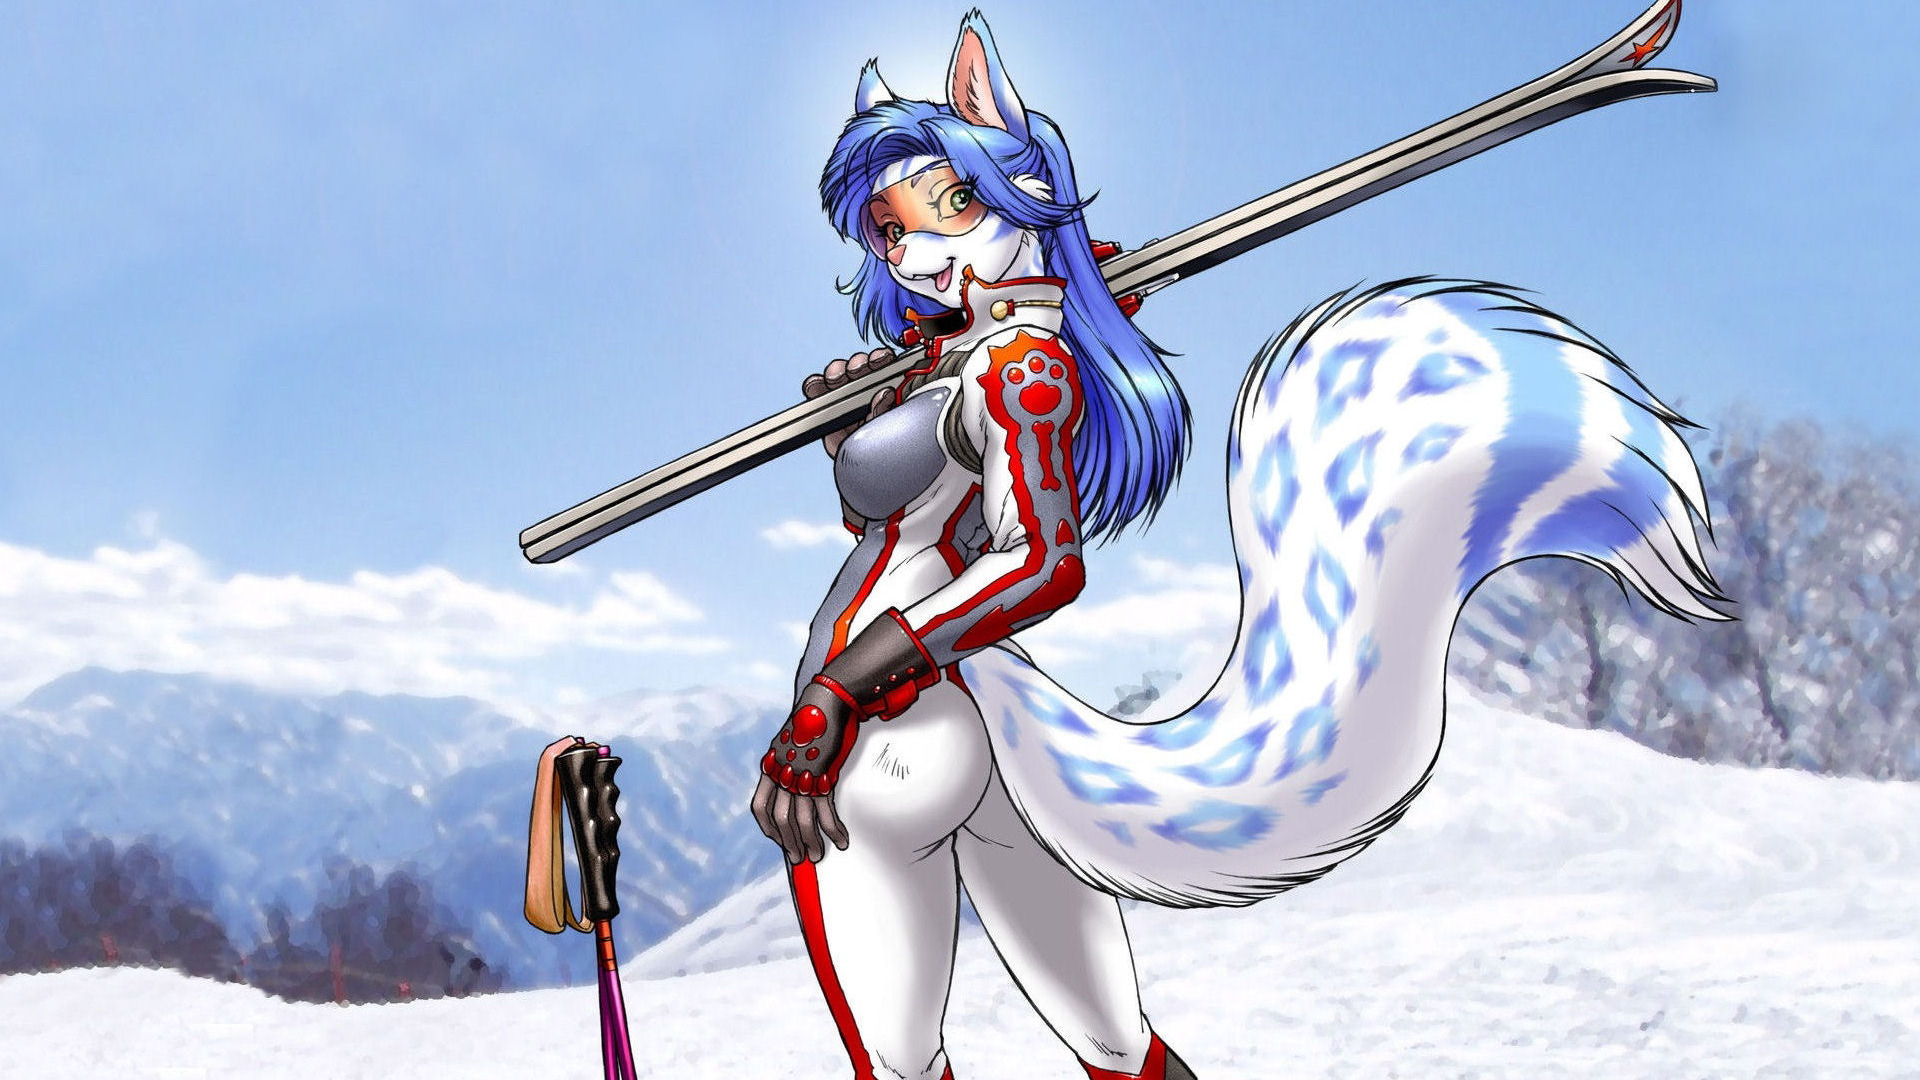 Anthro, Furry, Bodysuit, Snow Wallpapers HD / Desktop and Mobile